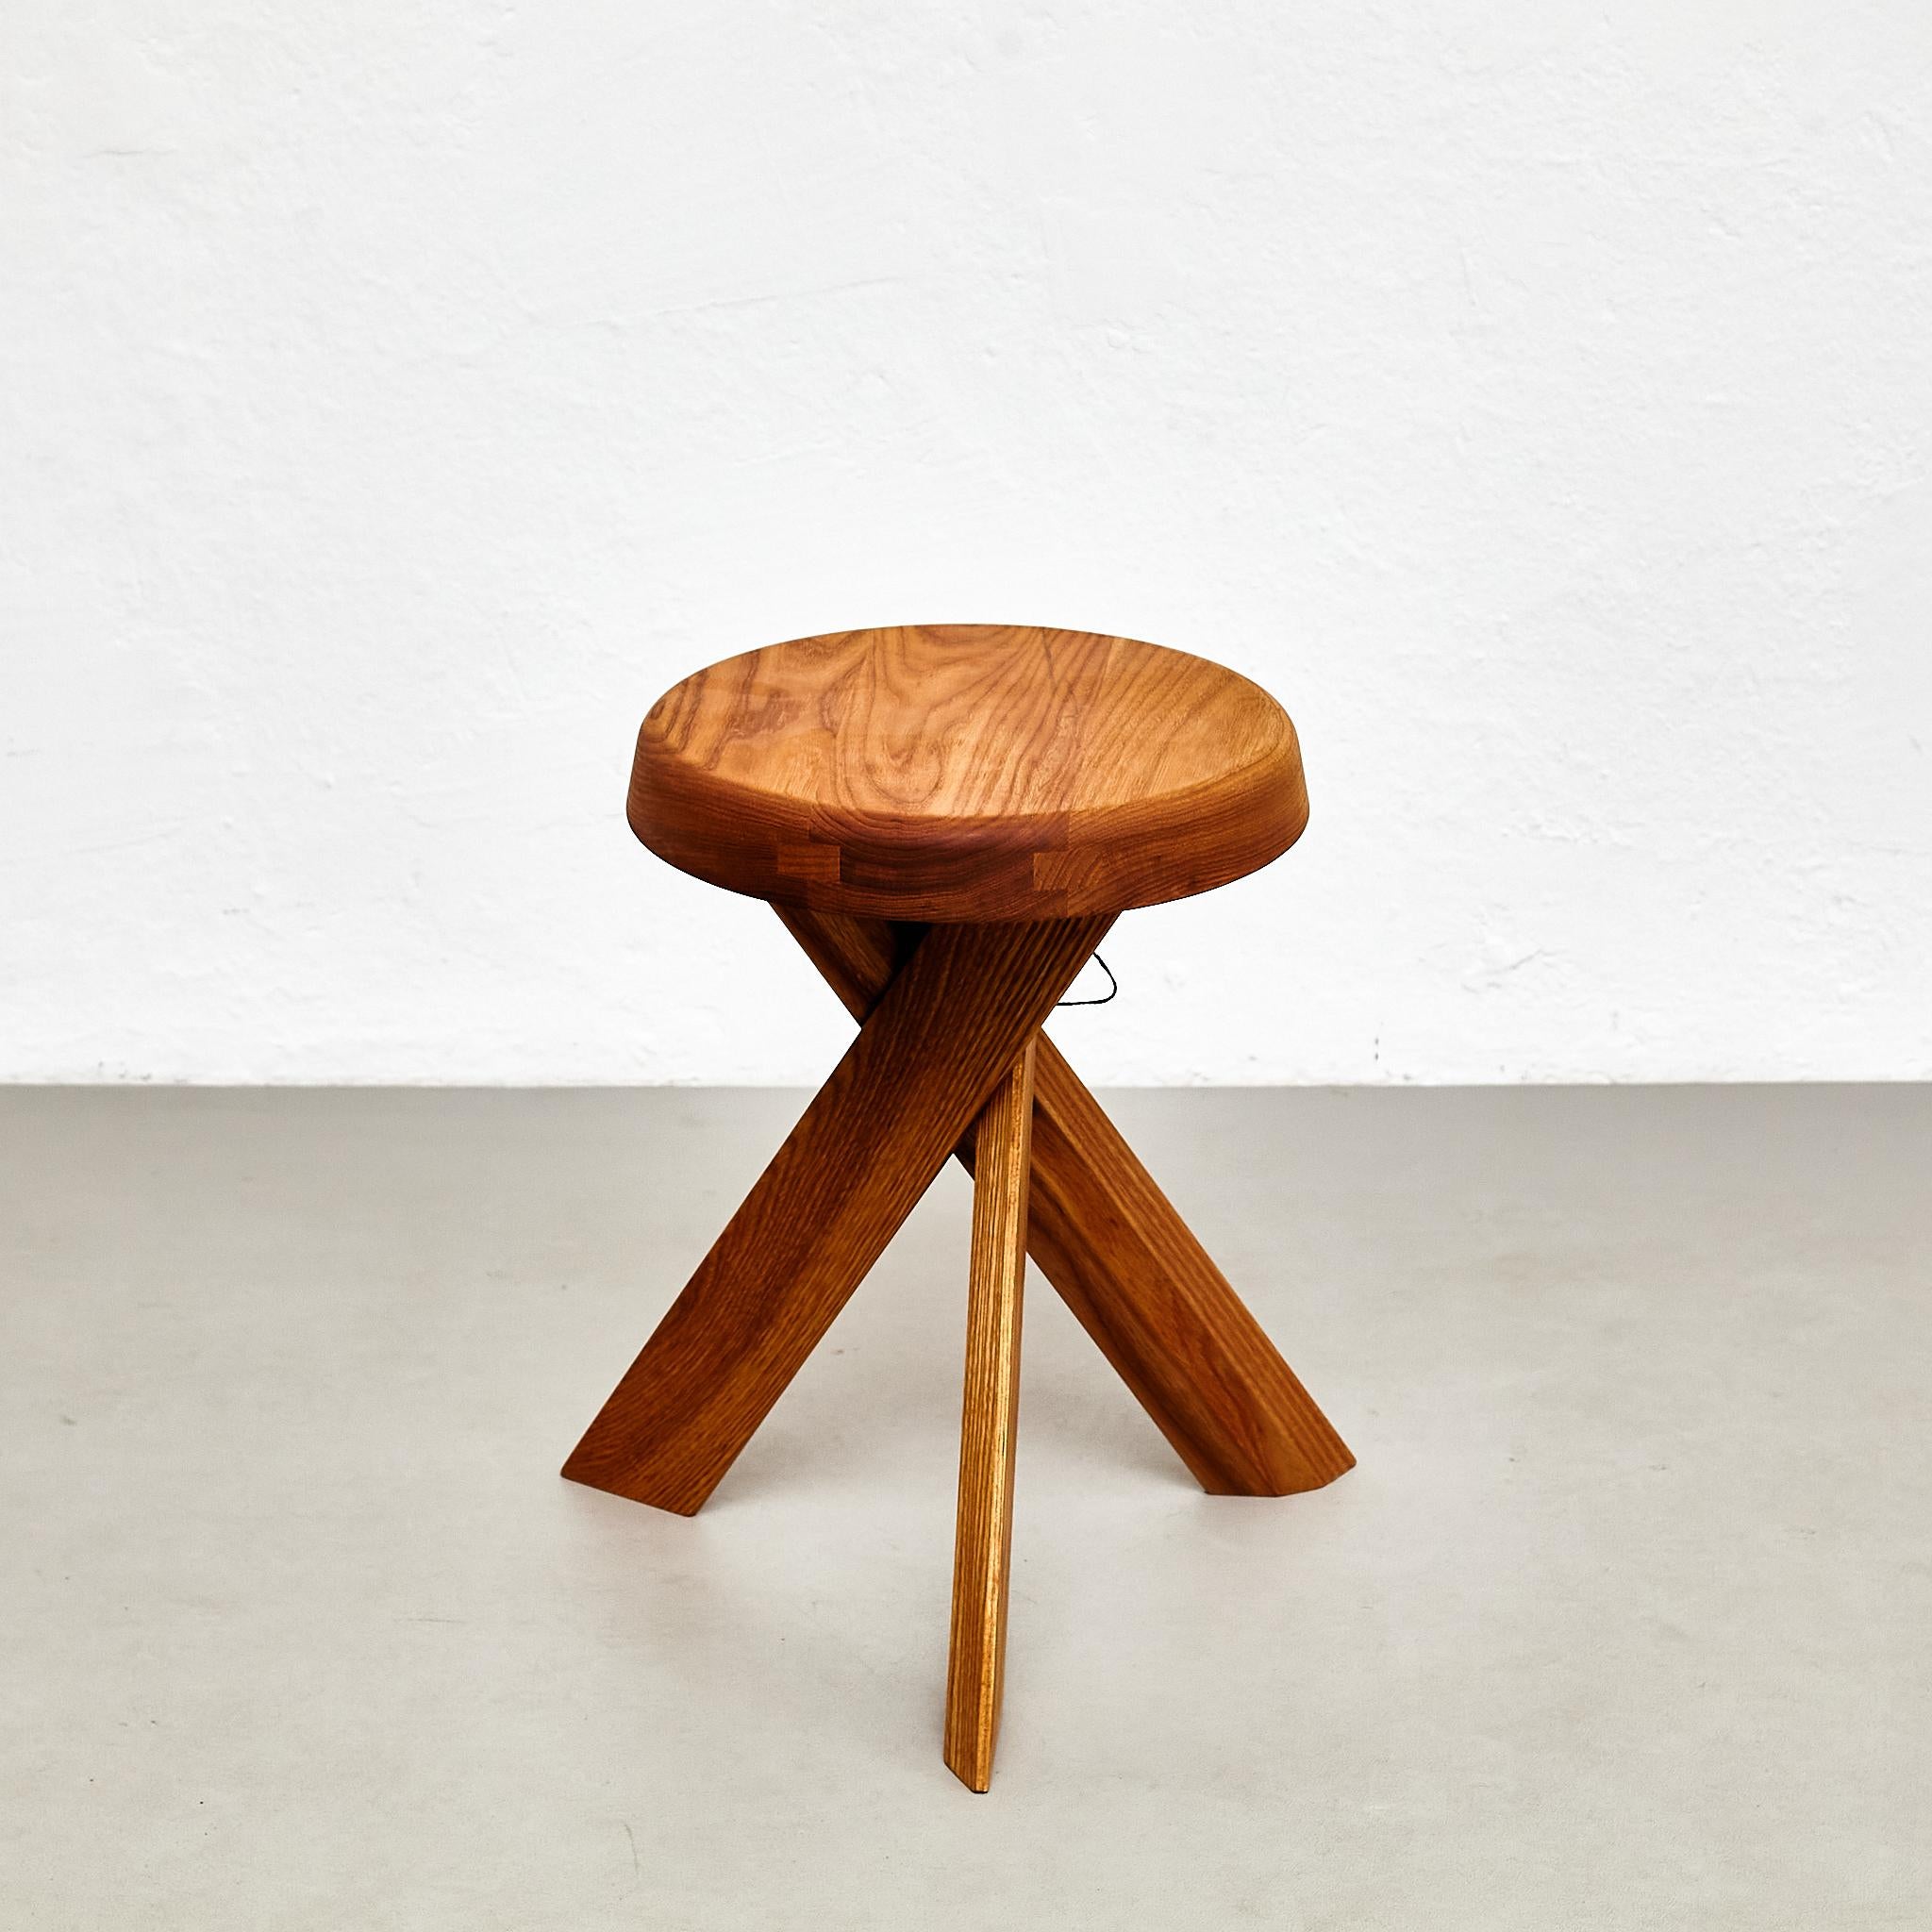 S 31 B stool designed by Pierre Chapo, circa 1960.
Manufactured by Chapo Creation in France, 2021.
Stamped solid elmwood.

In good original condition, with minor wear consistent with age and use, preserving a beautiful patina.

Pierre Chapo is born